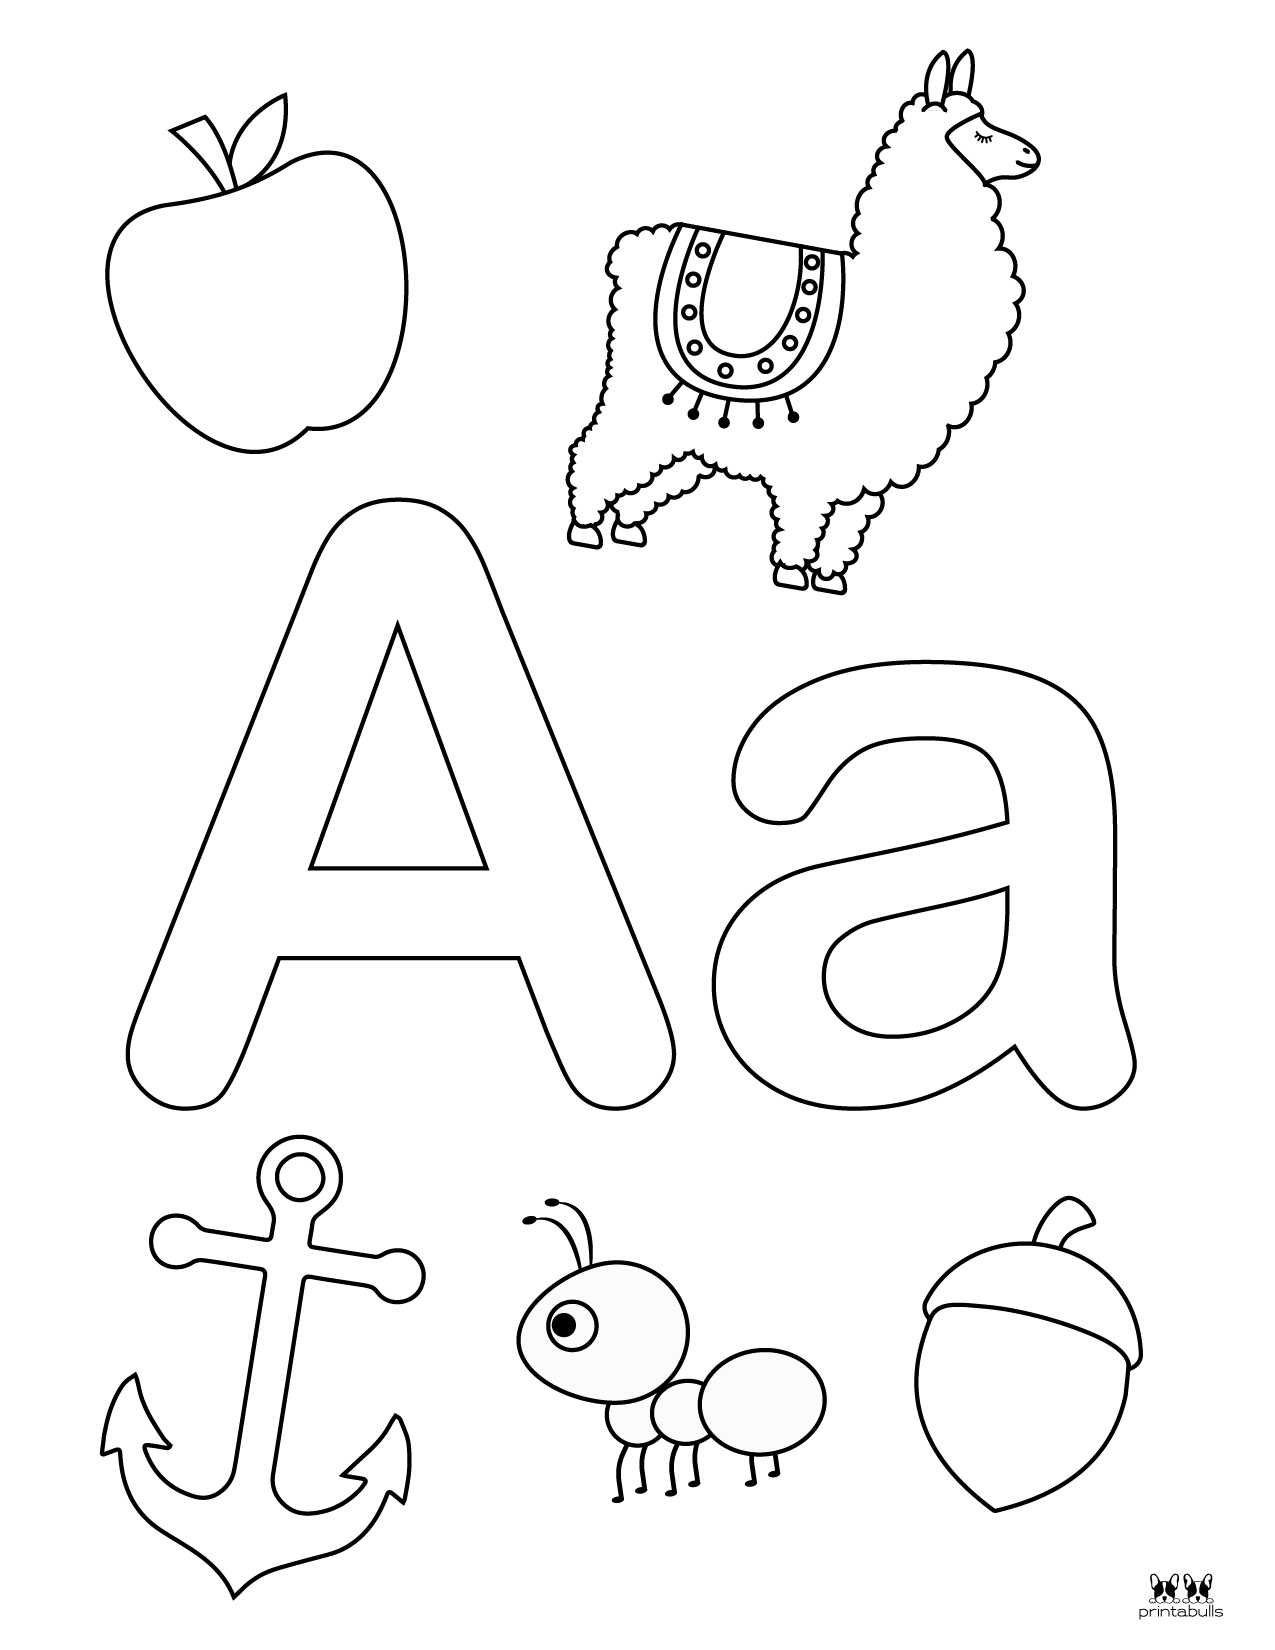 letter-i-worksheets-for-kindergarten-with-songs-activities-freebies